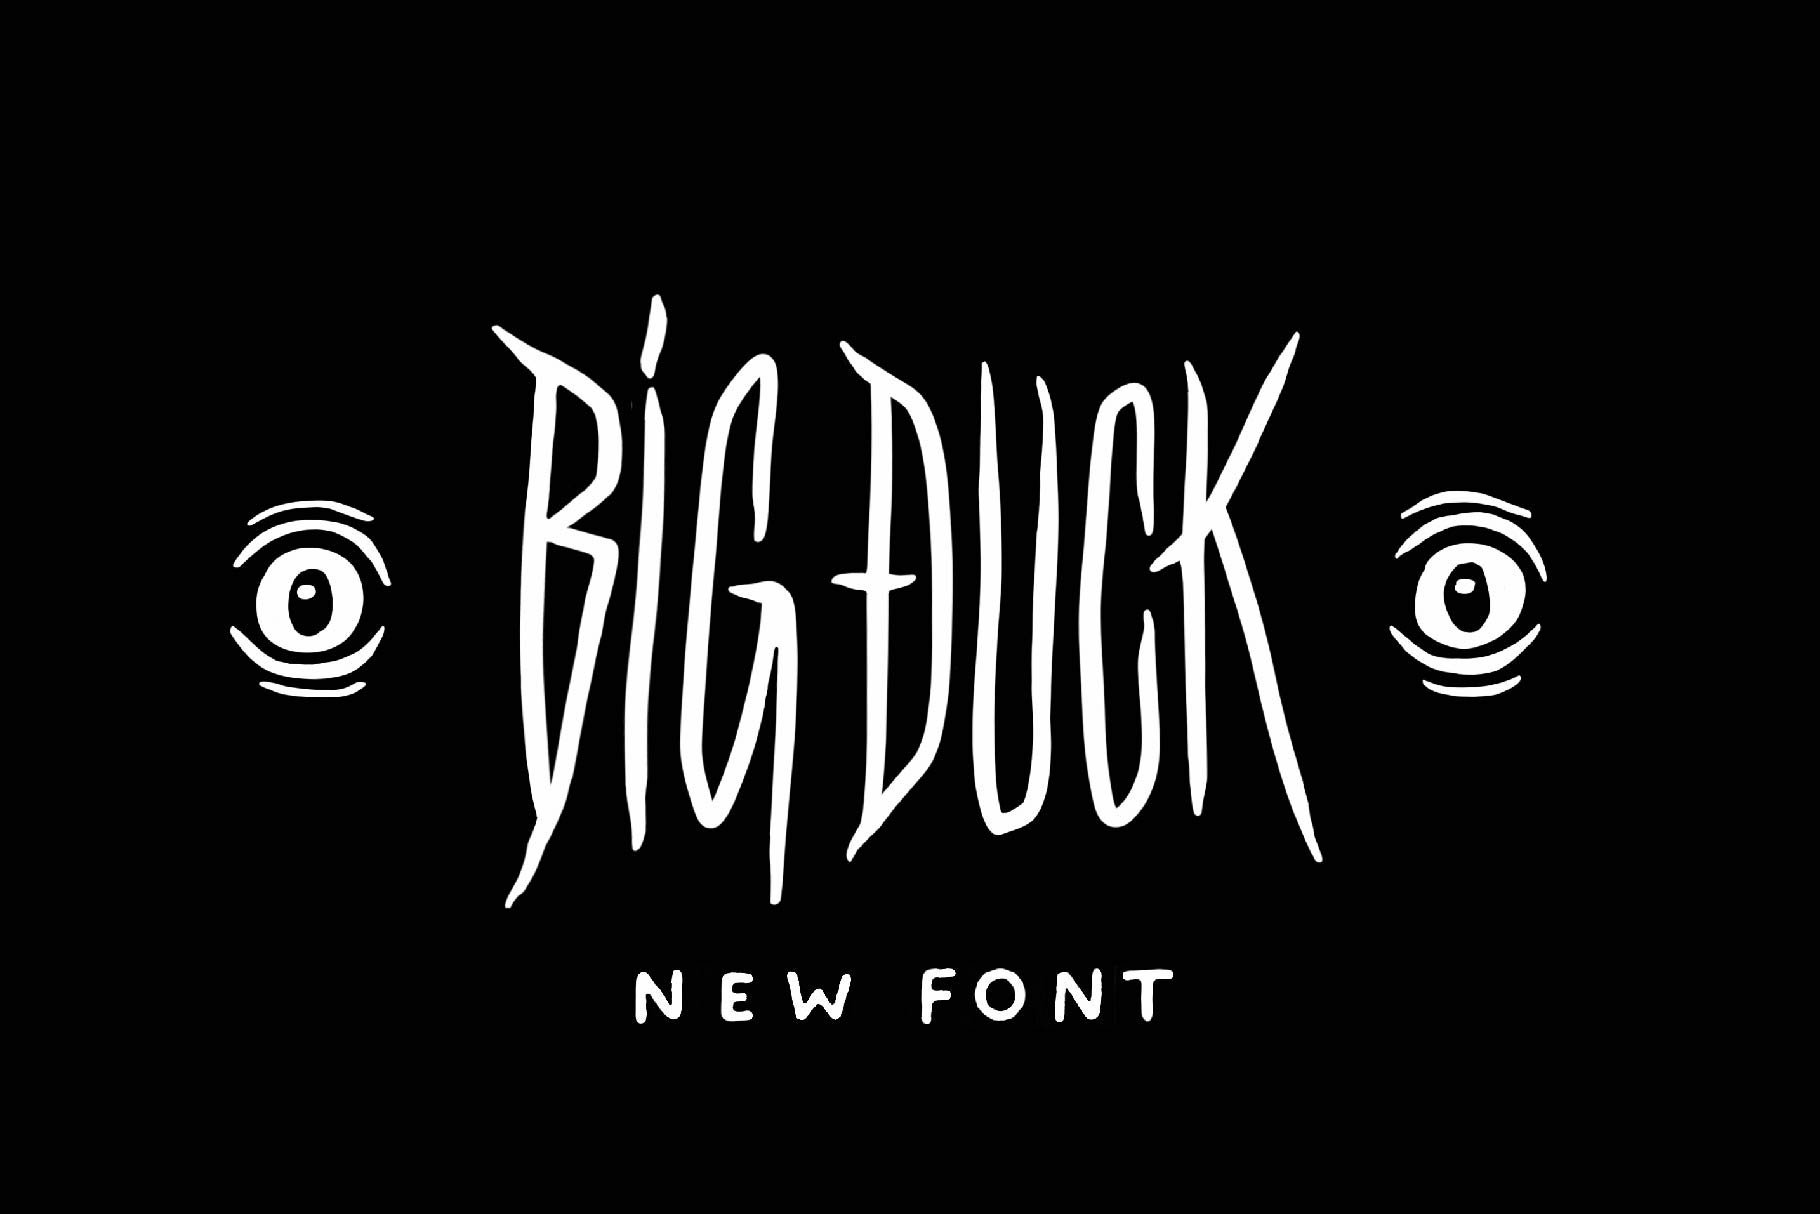 Big Duck cover image.